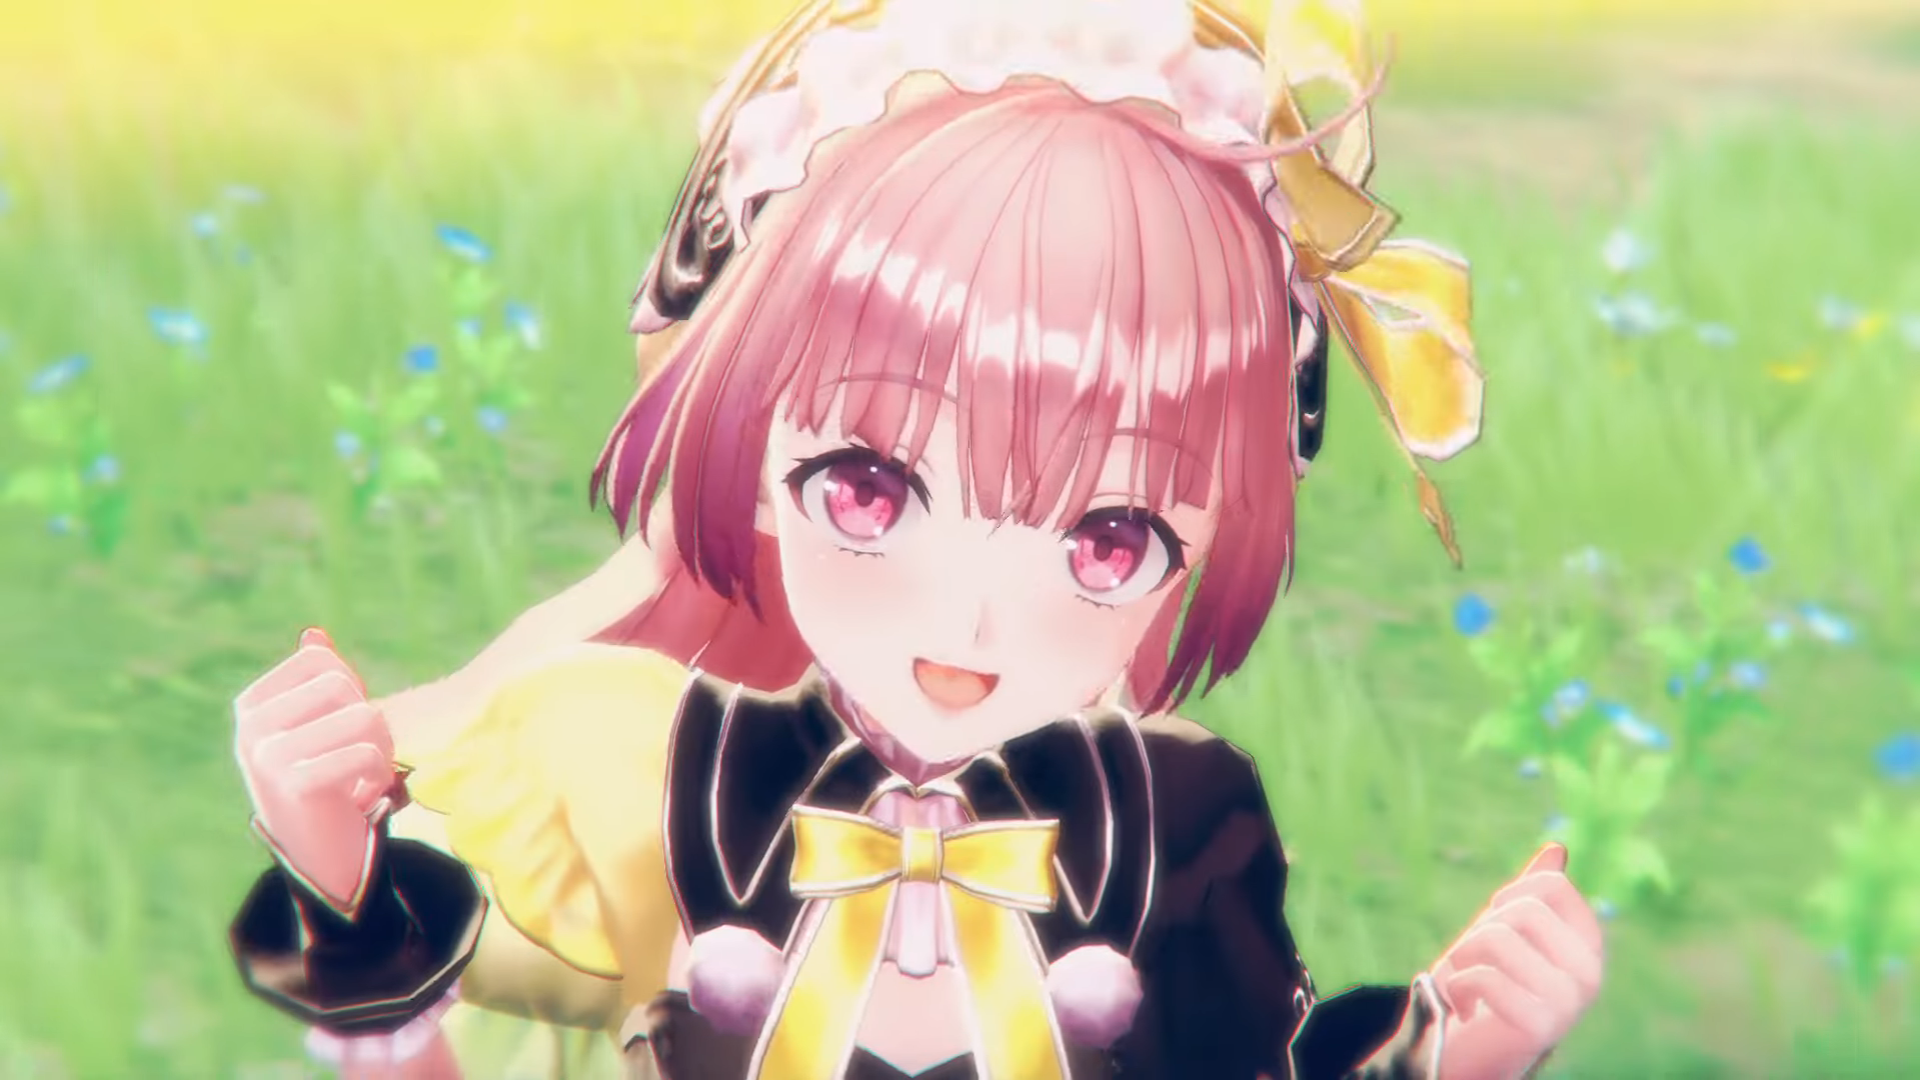 New Atelier Resleriana Trailers Introduce Lydie & Suelle